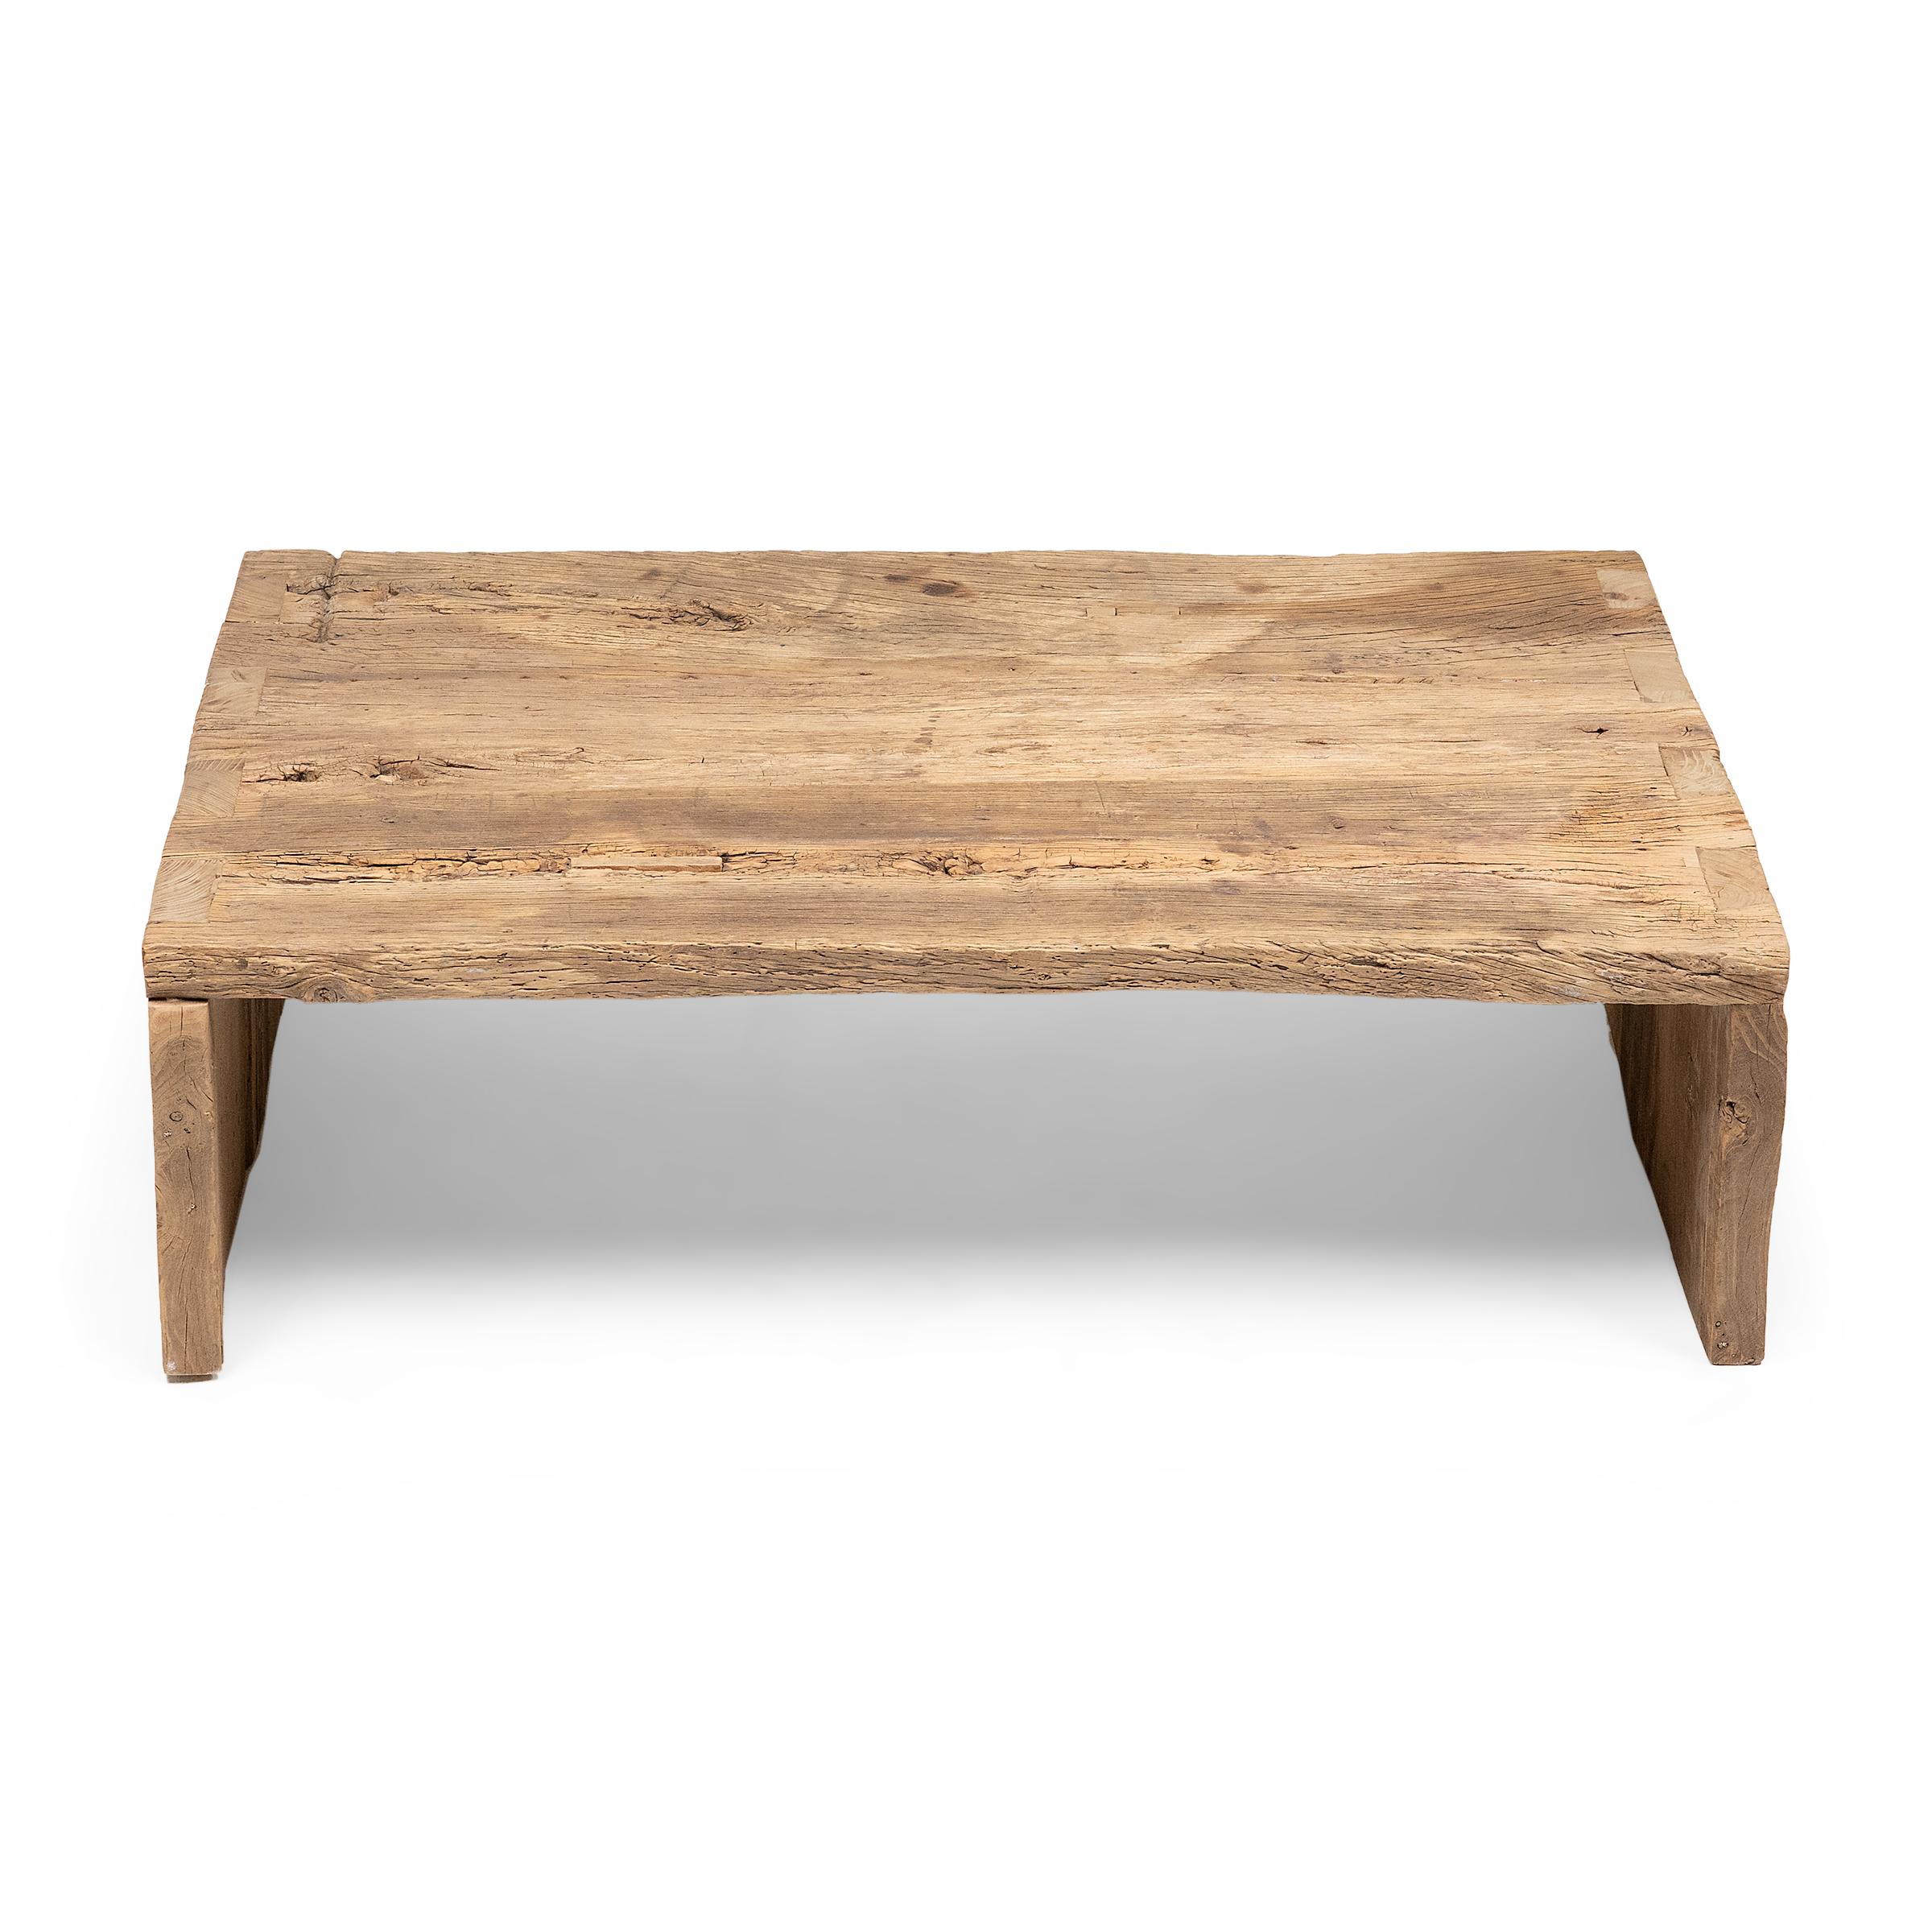 Chinese Reclaimed Elm Waterfall Coffee Table For Sale